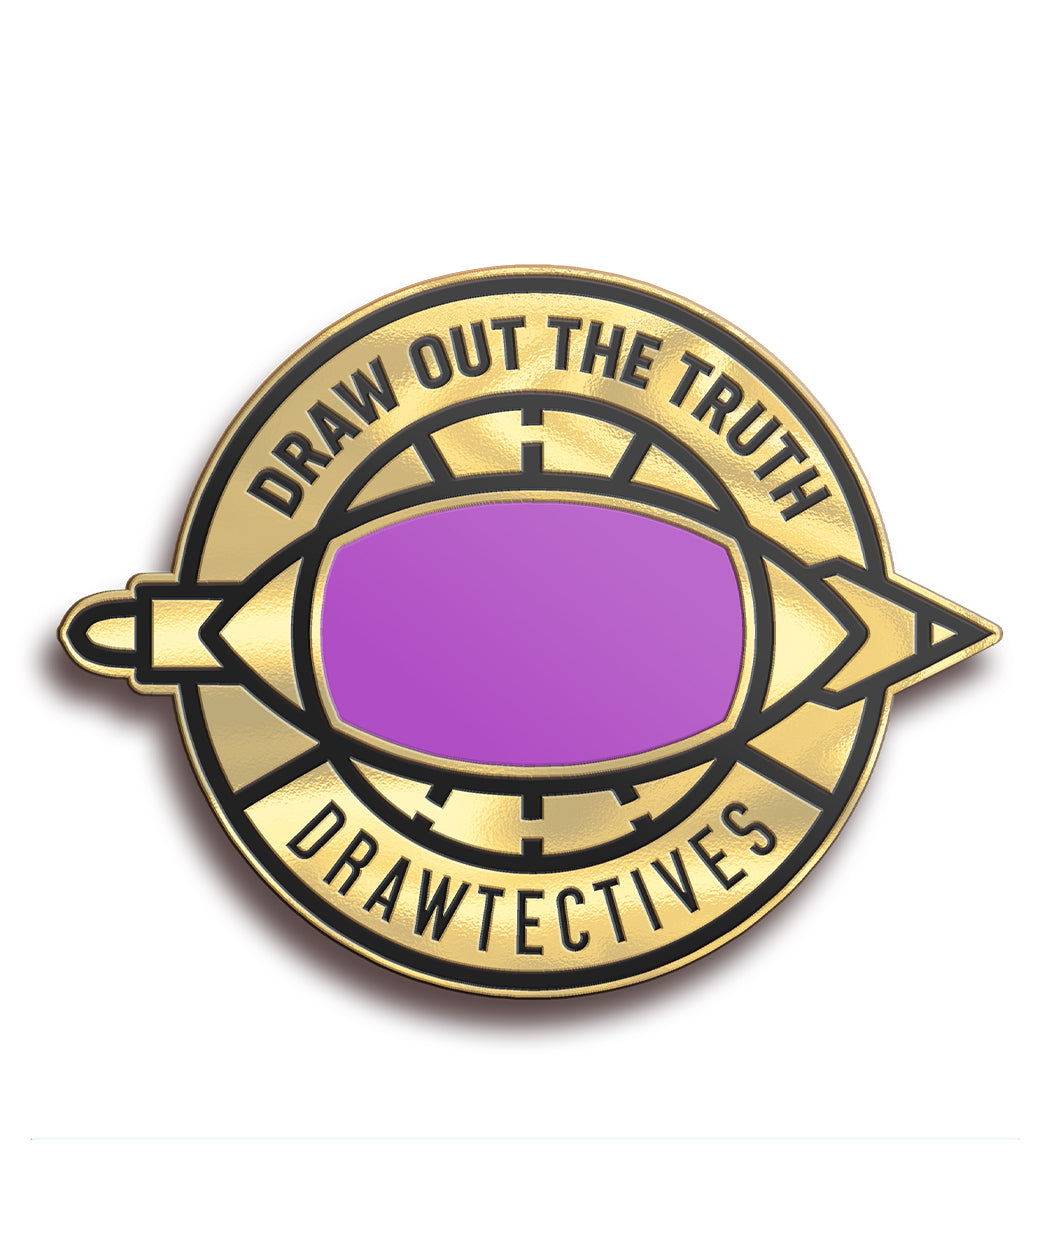 A gold circular pin with the words "Draw Out the Truth" across the top and "Drawtectives" along the bottom. There is a purple section in the middle. From Drawfee. 